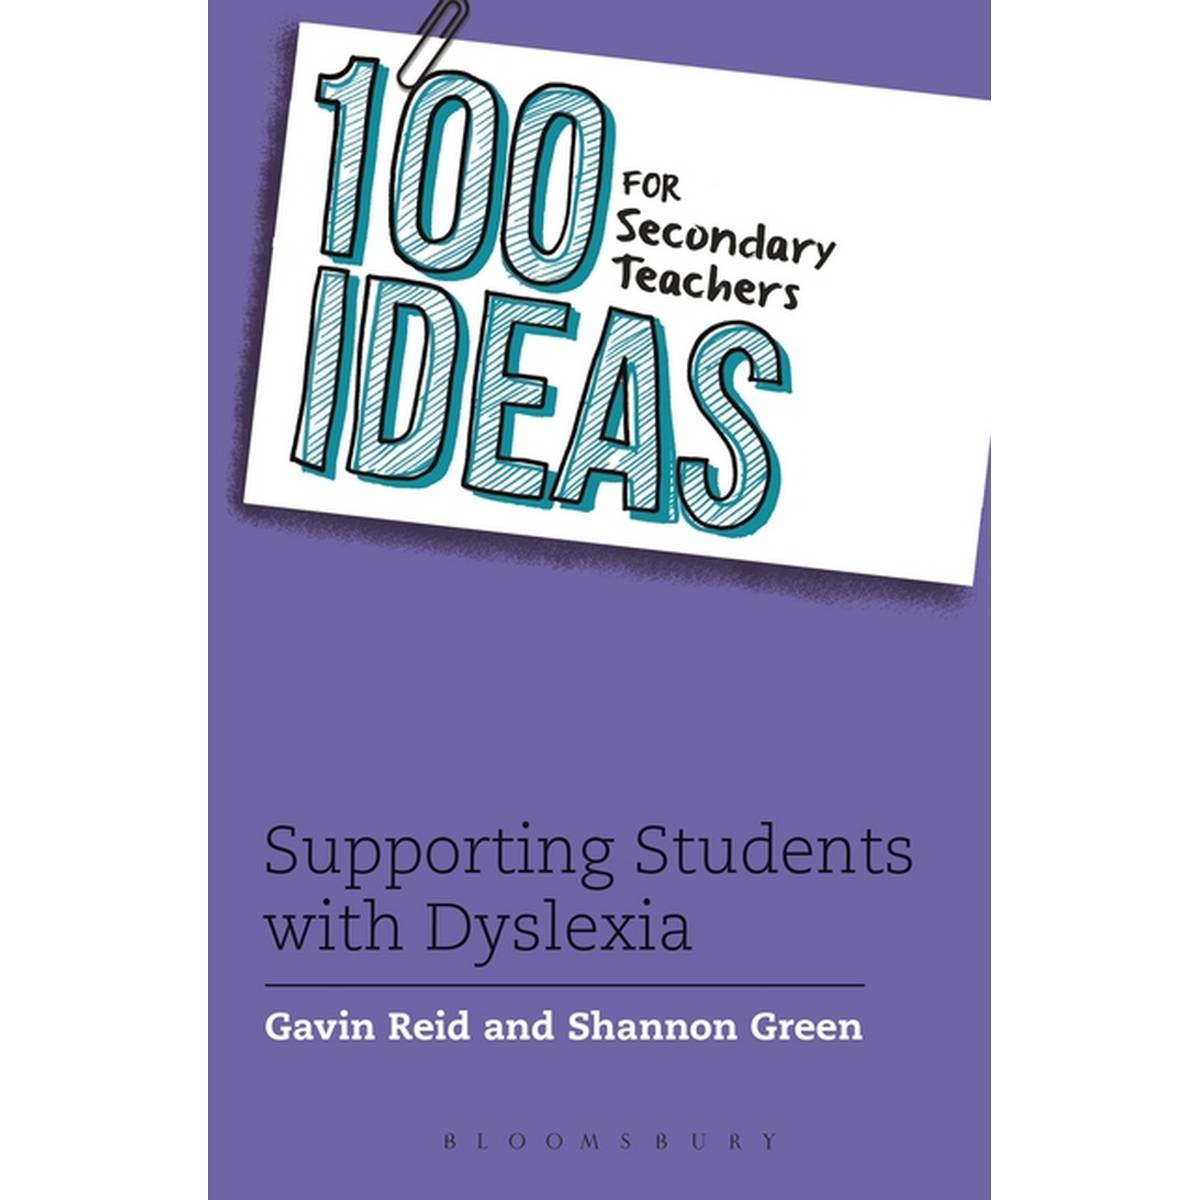 100 Ideas for Secondary Teachers: Supporting Students with Dyslexia